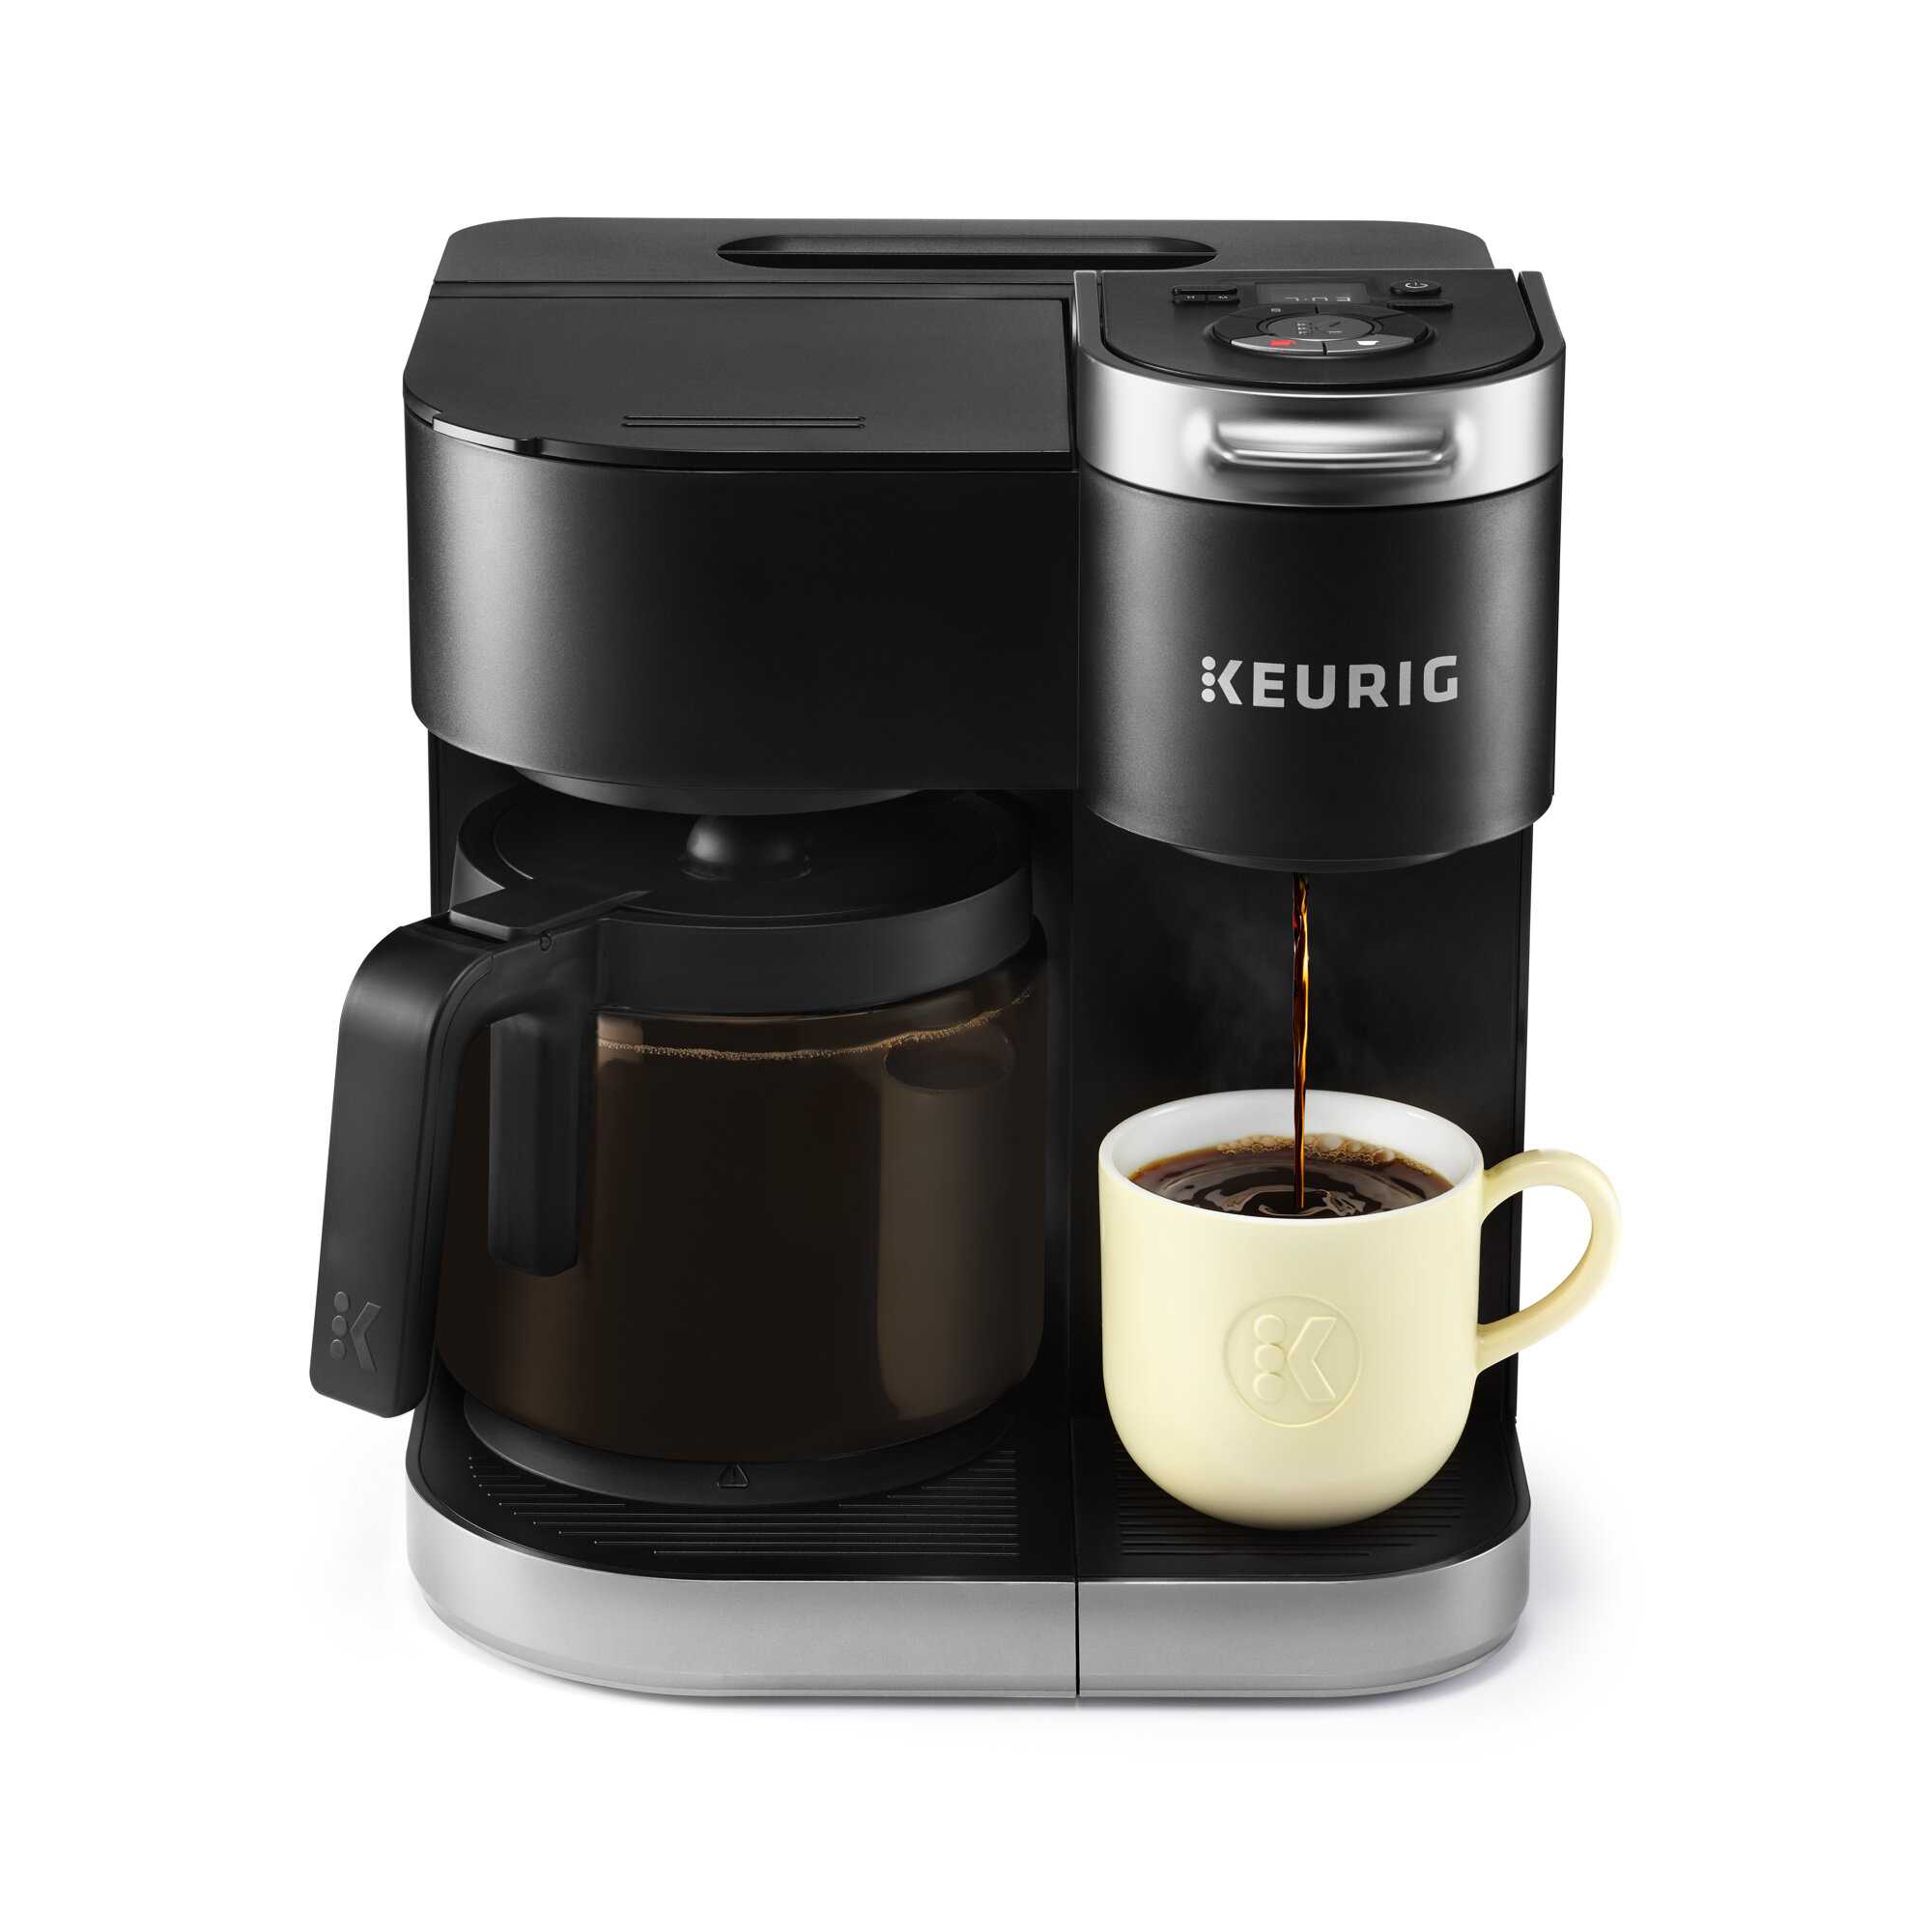 Keurig K-Classic Coffee Maker with Coffee Lover's 40 count K-Cup Pods  Variety Pack, Black